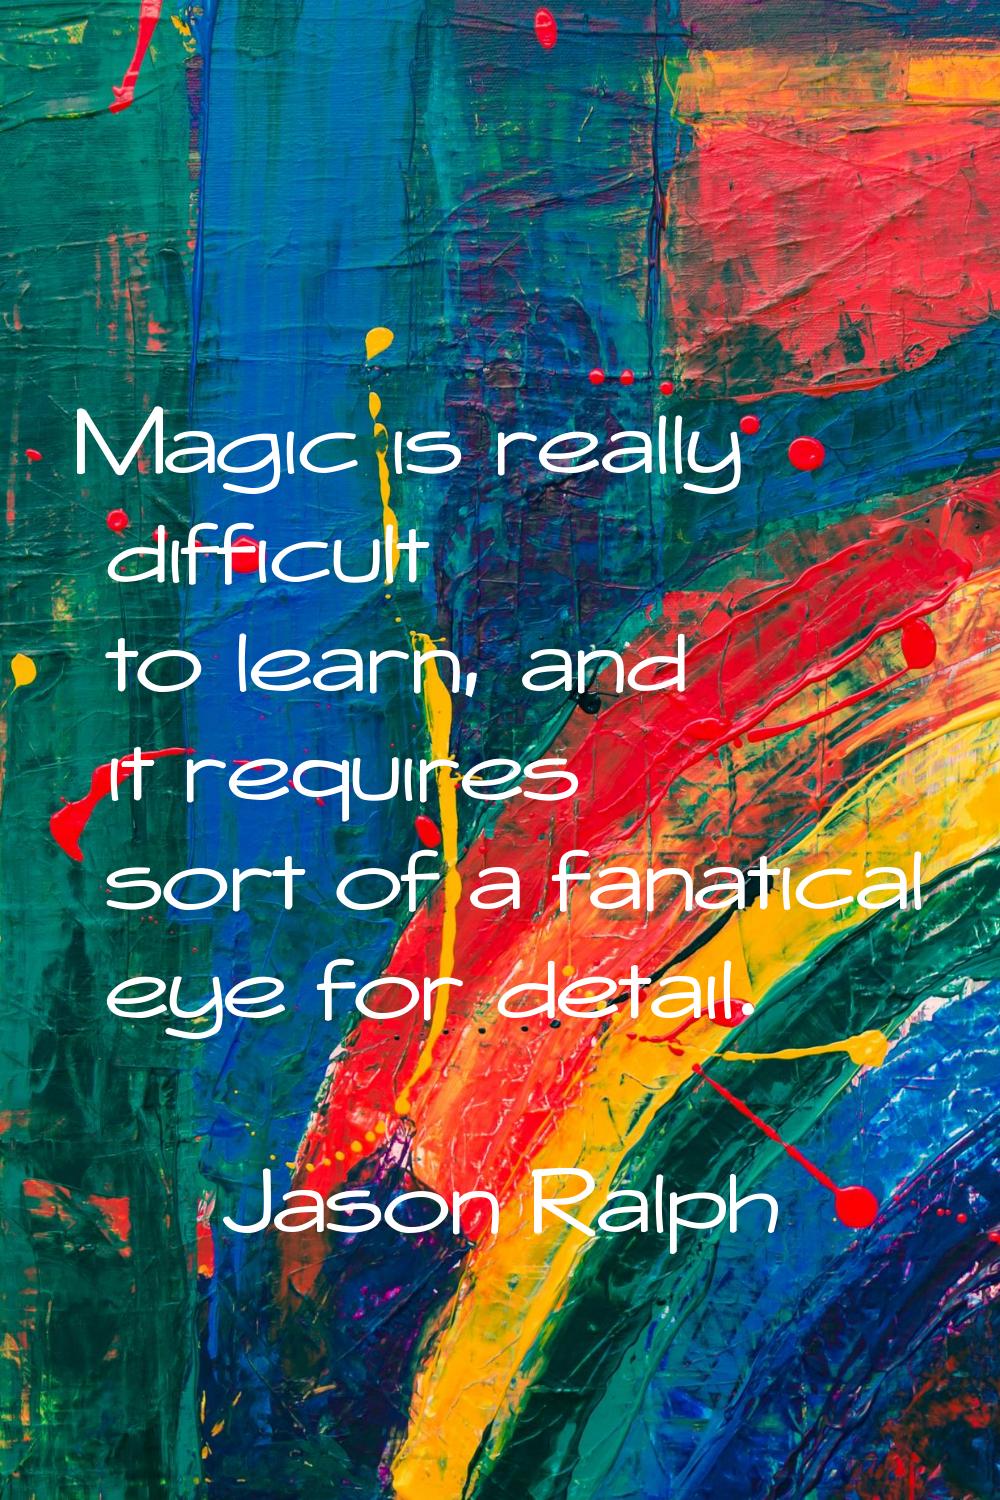 Magic is really difficult to learn, and it requires sort of a fanatical eye for detail.